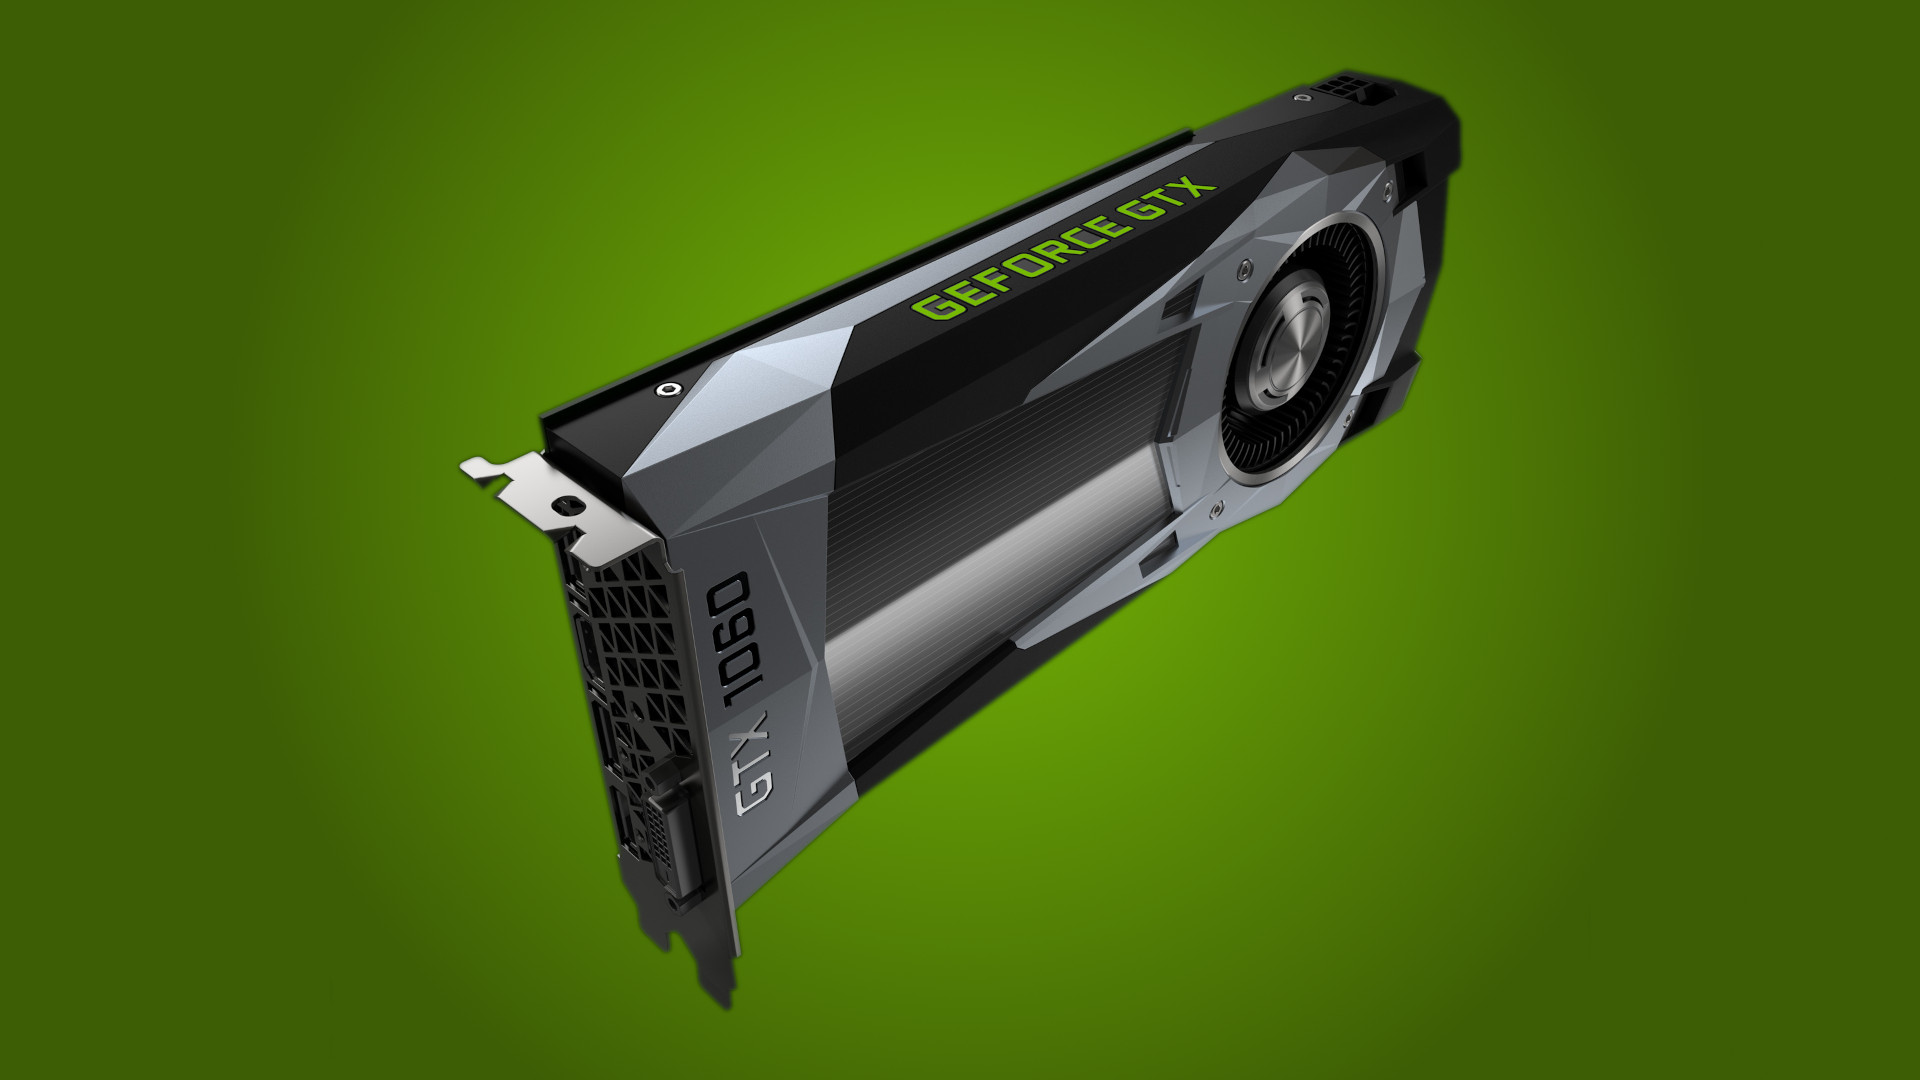 GeForce GTX 1060 Founders Edition graphics card against a two-tone green background